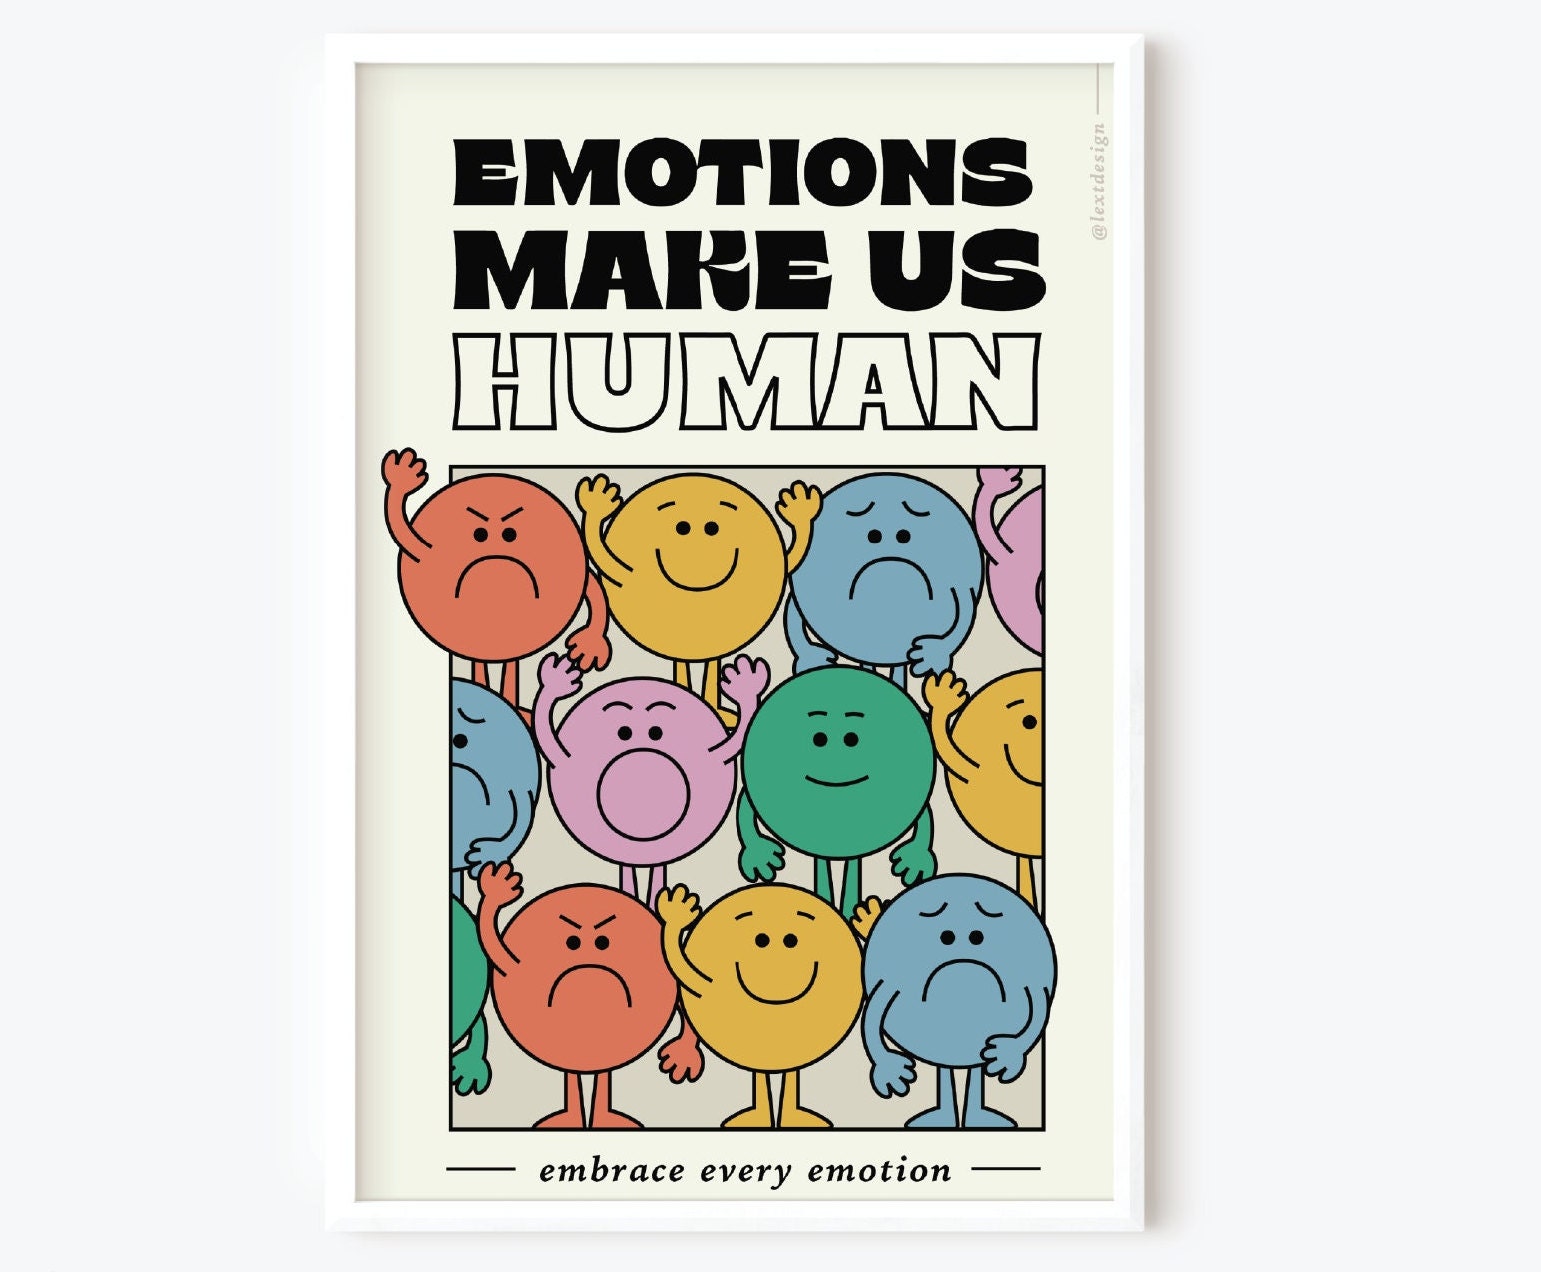 how did humans develop emotions